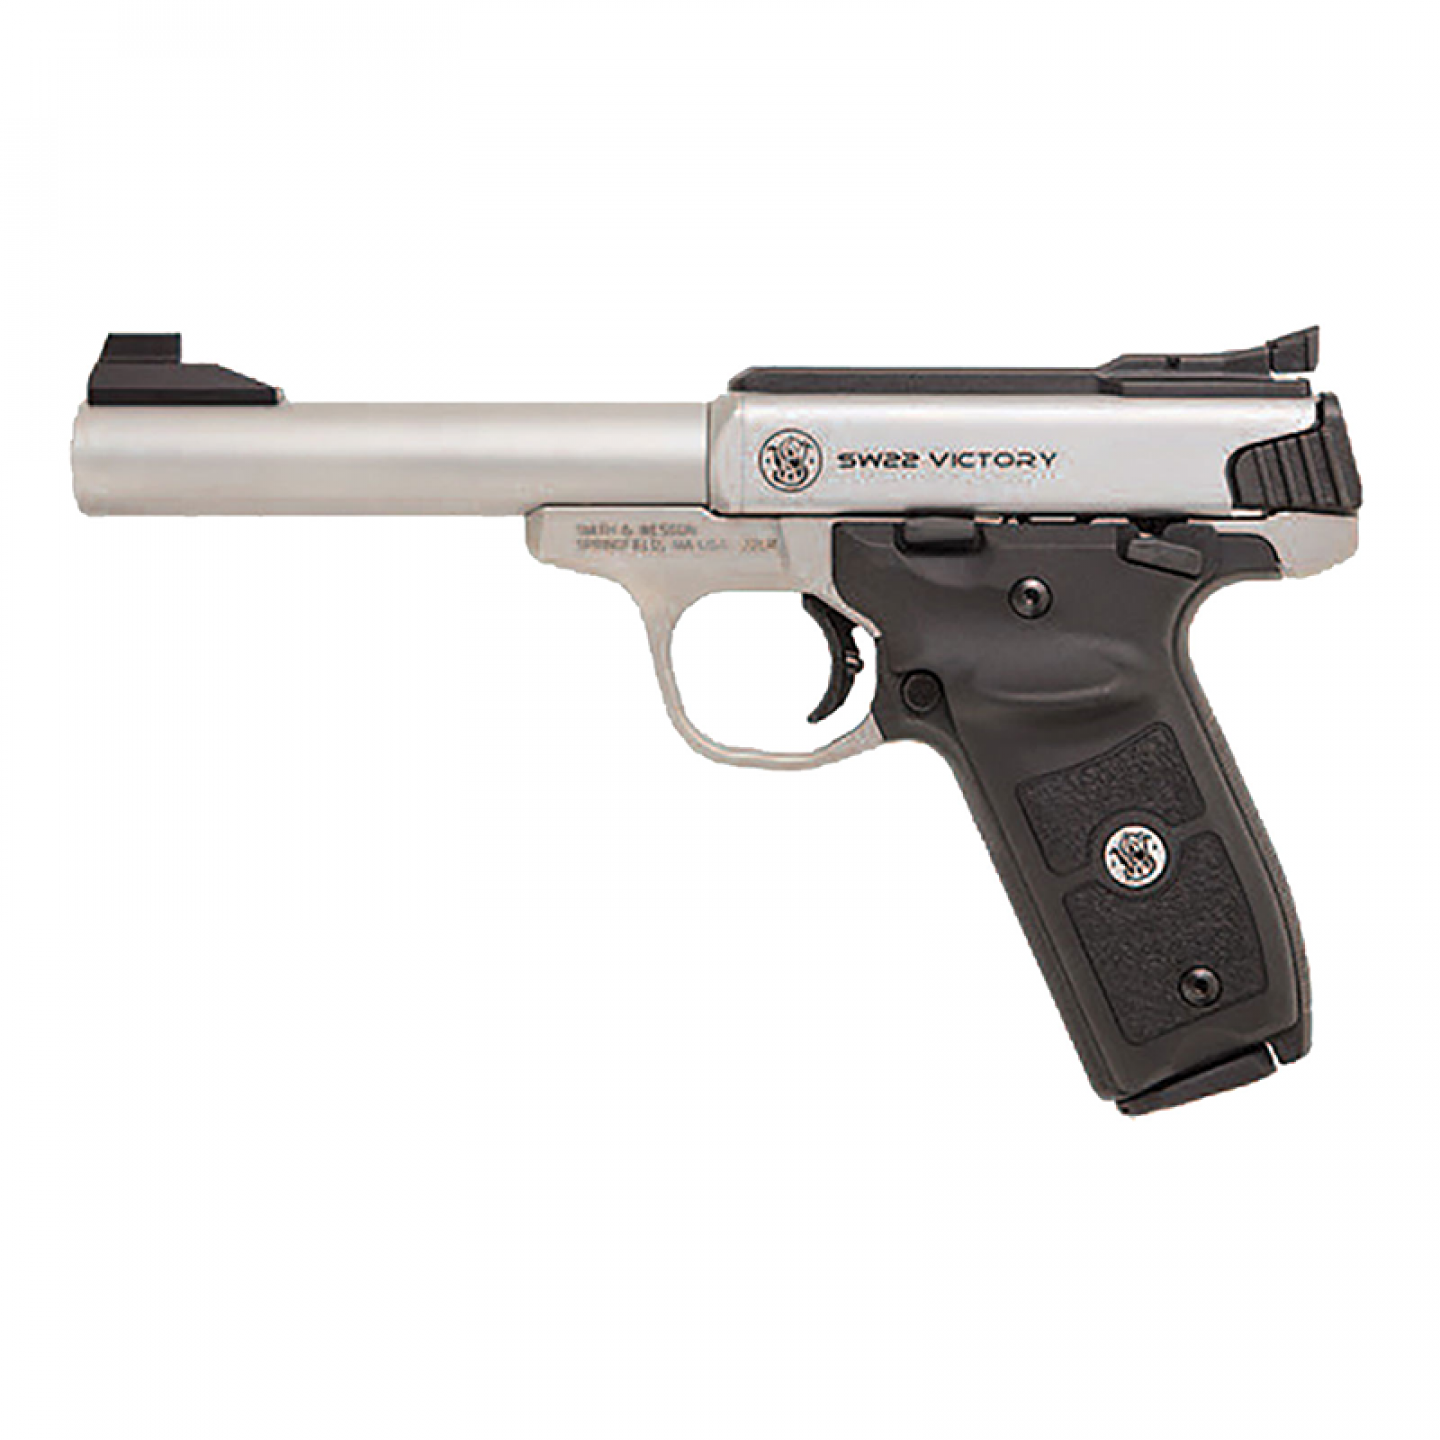 SMITH & WESSON SW22 VICTORY™